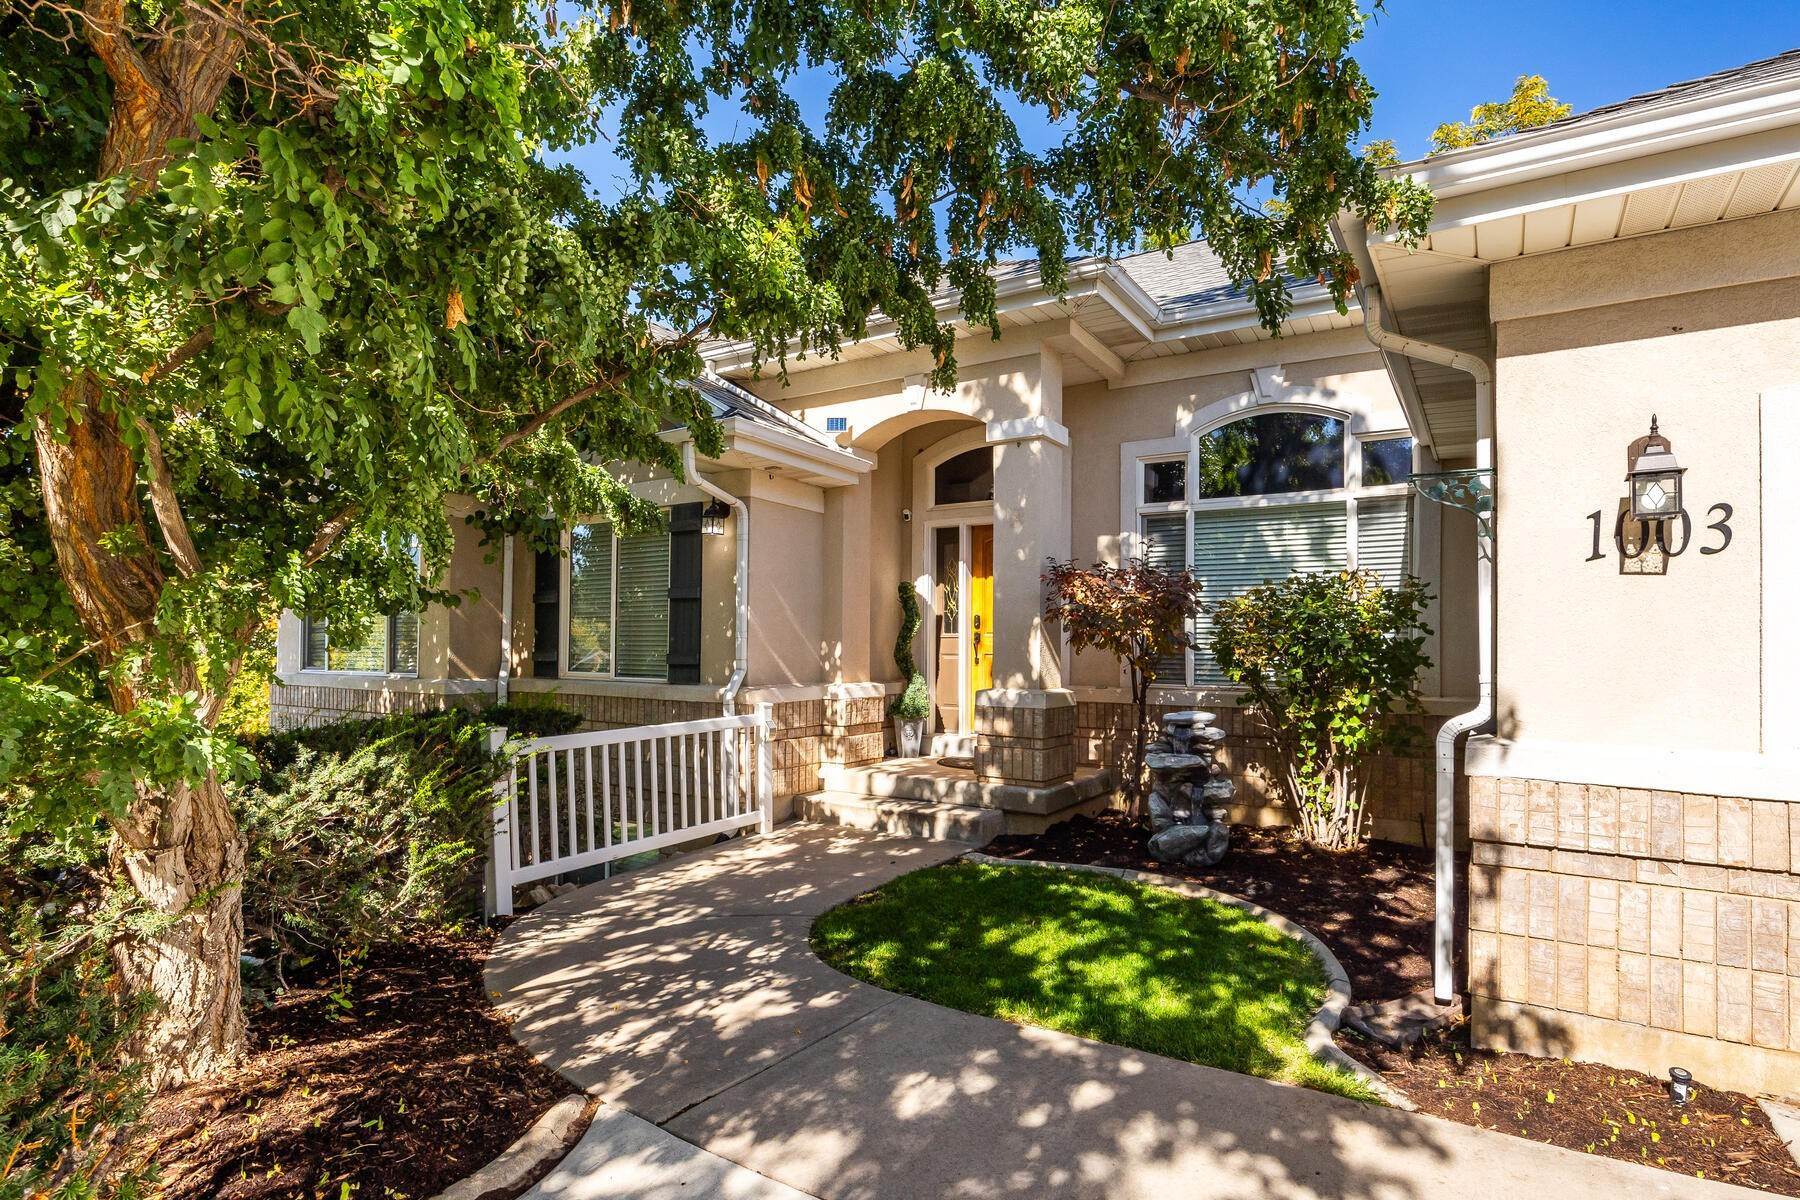 Single Family Homes for Sale at Updated Rambler Across The Street From The 14th Hole of Eaglewood Golf Course 1003 E Fairway Drive North Salt Lake, Utah 84054 United States